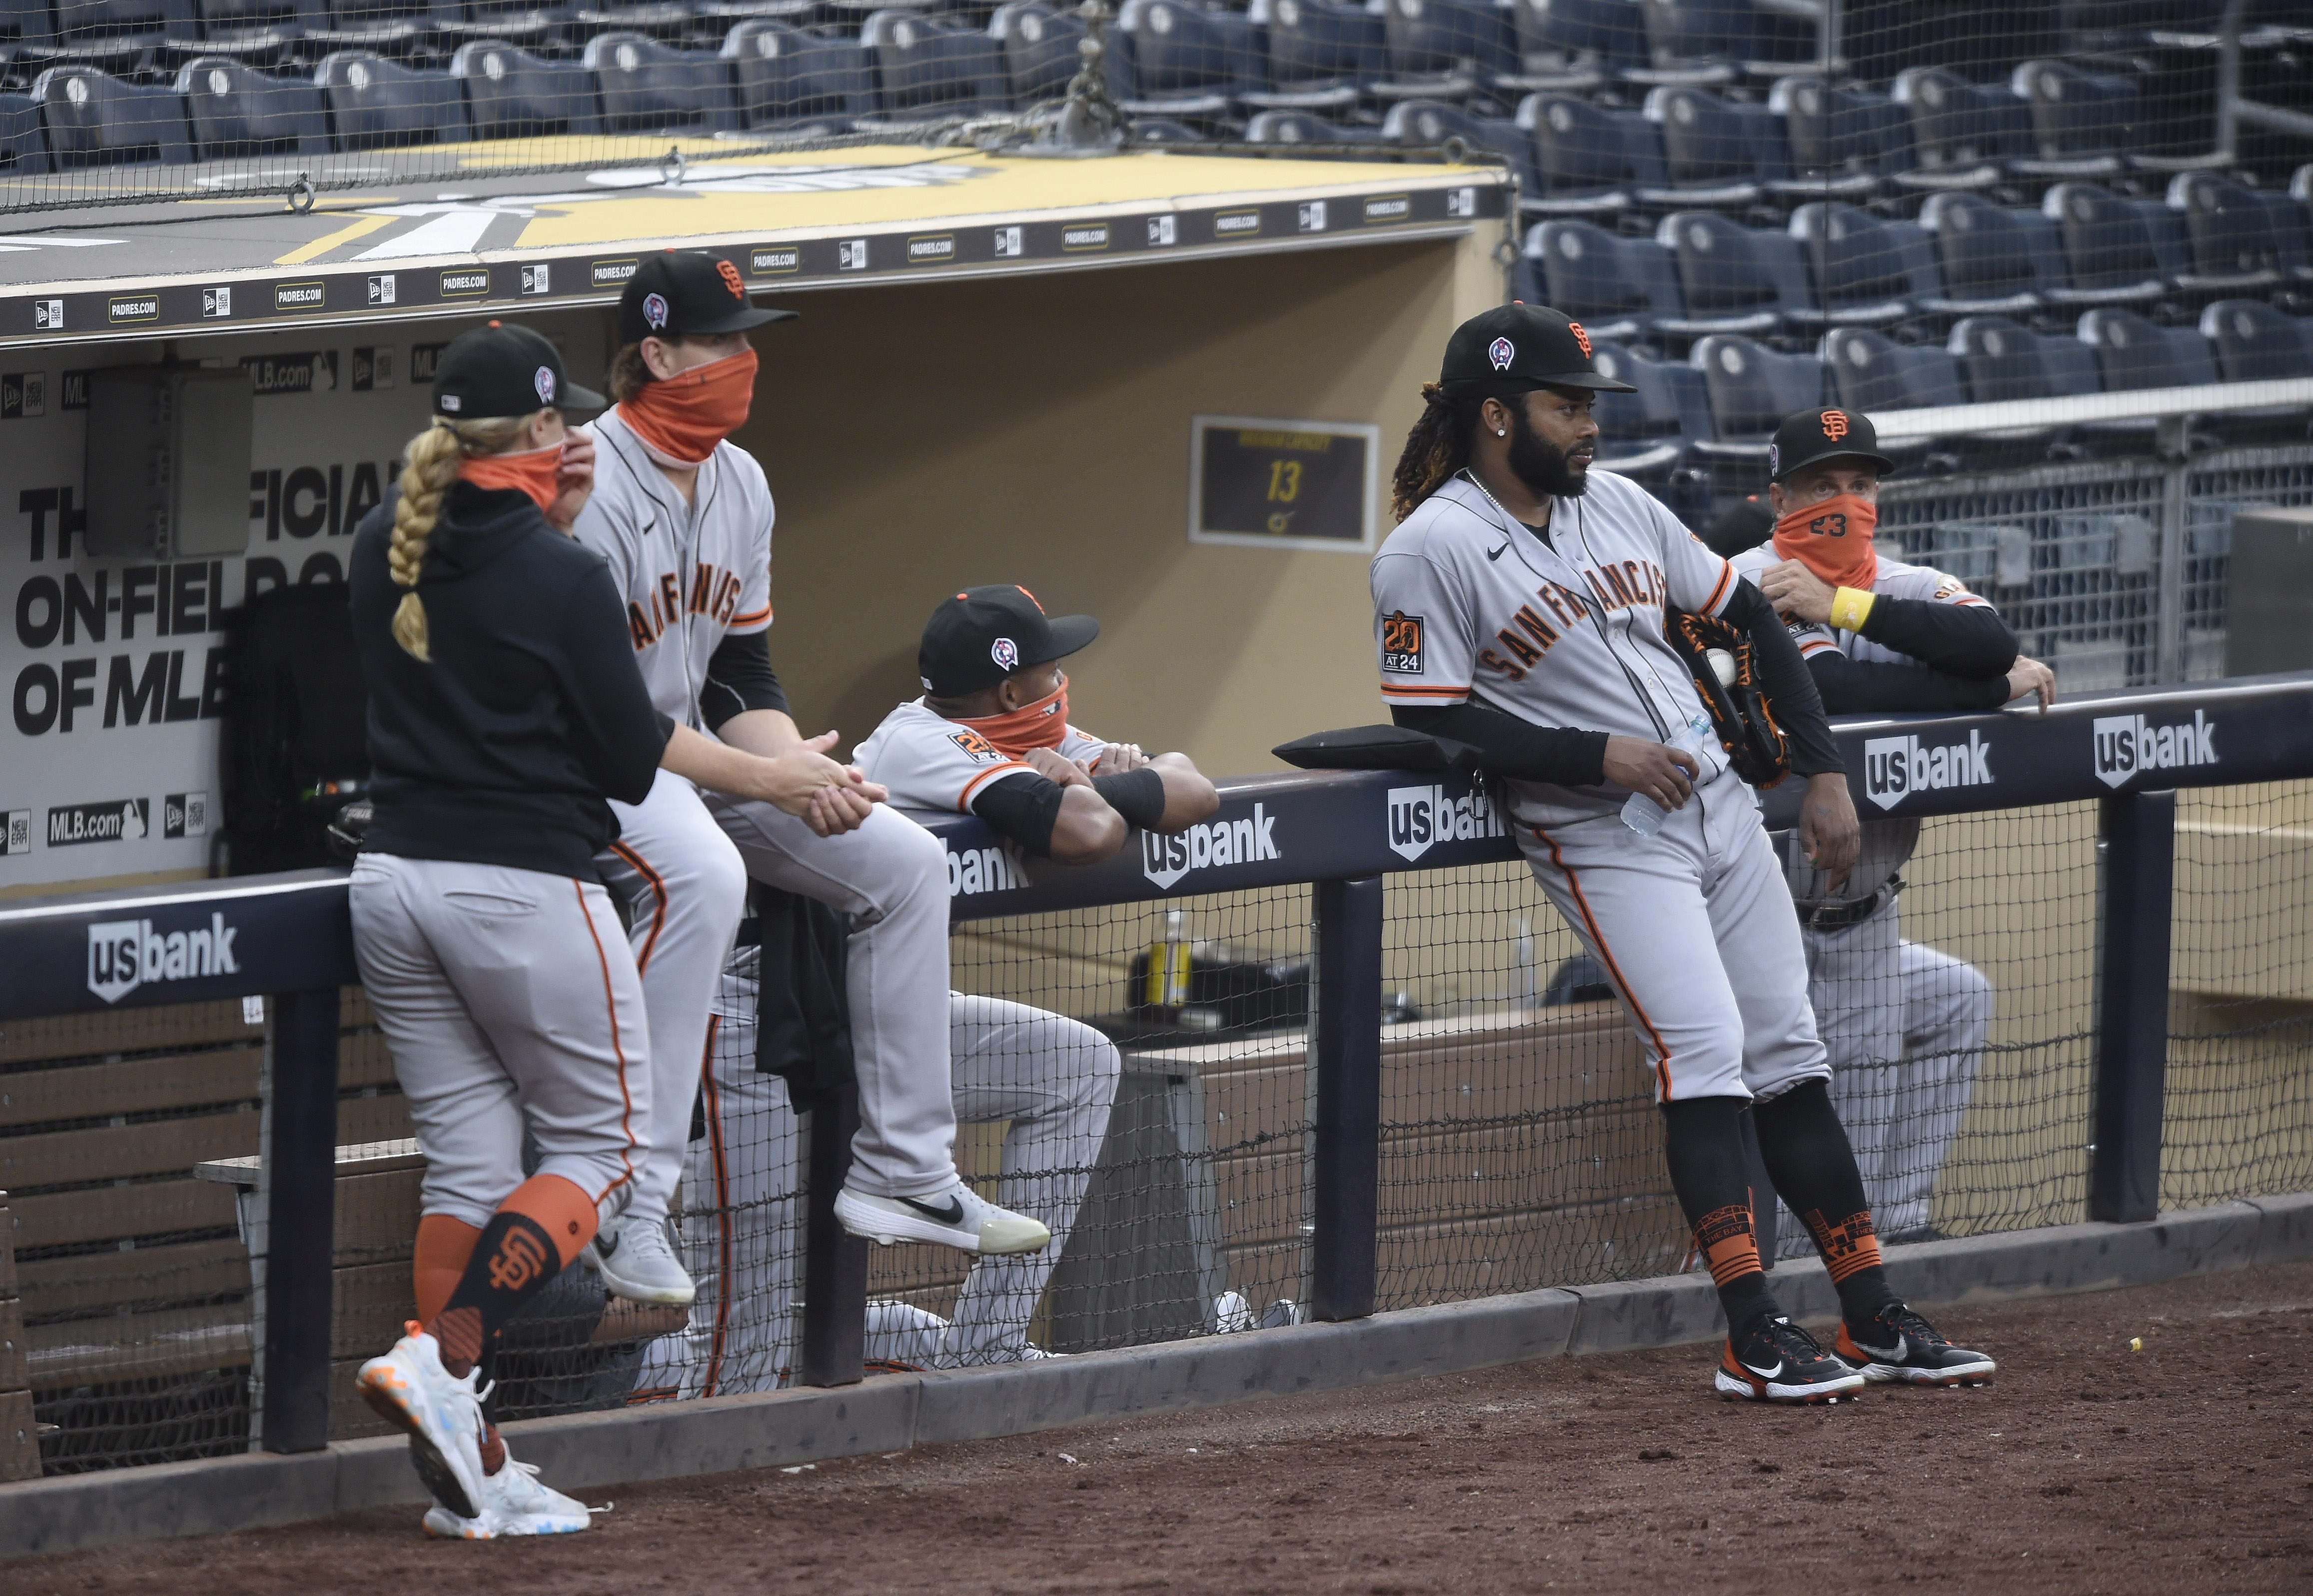 San Francisco Giants and San Diego Padres game was postponed after a positive test for COVID